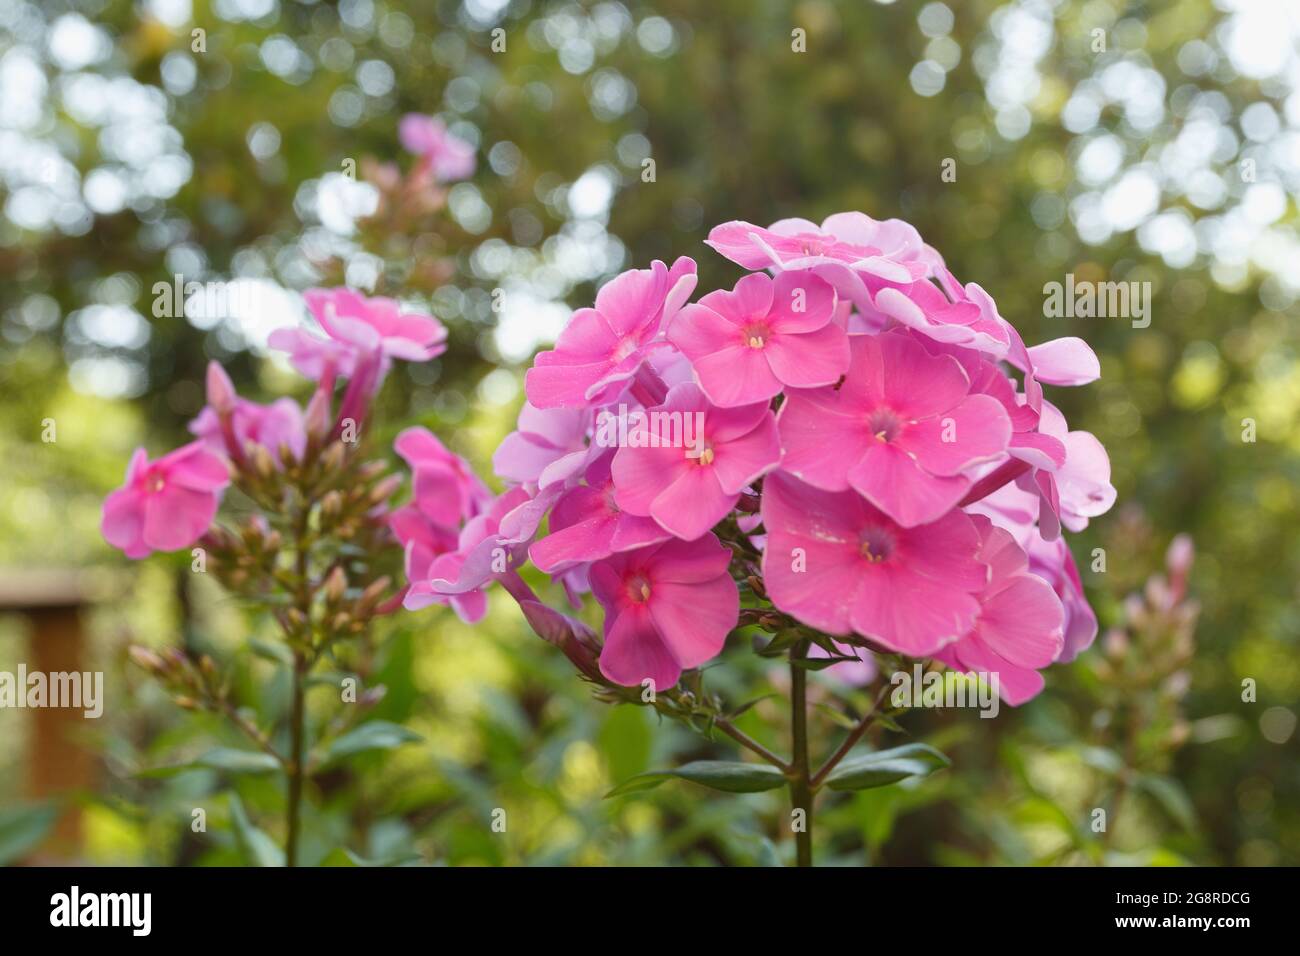 Pink phloxes blossoming in the garden, close Stock Photo